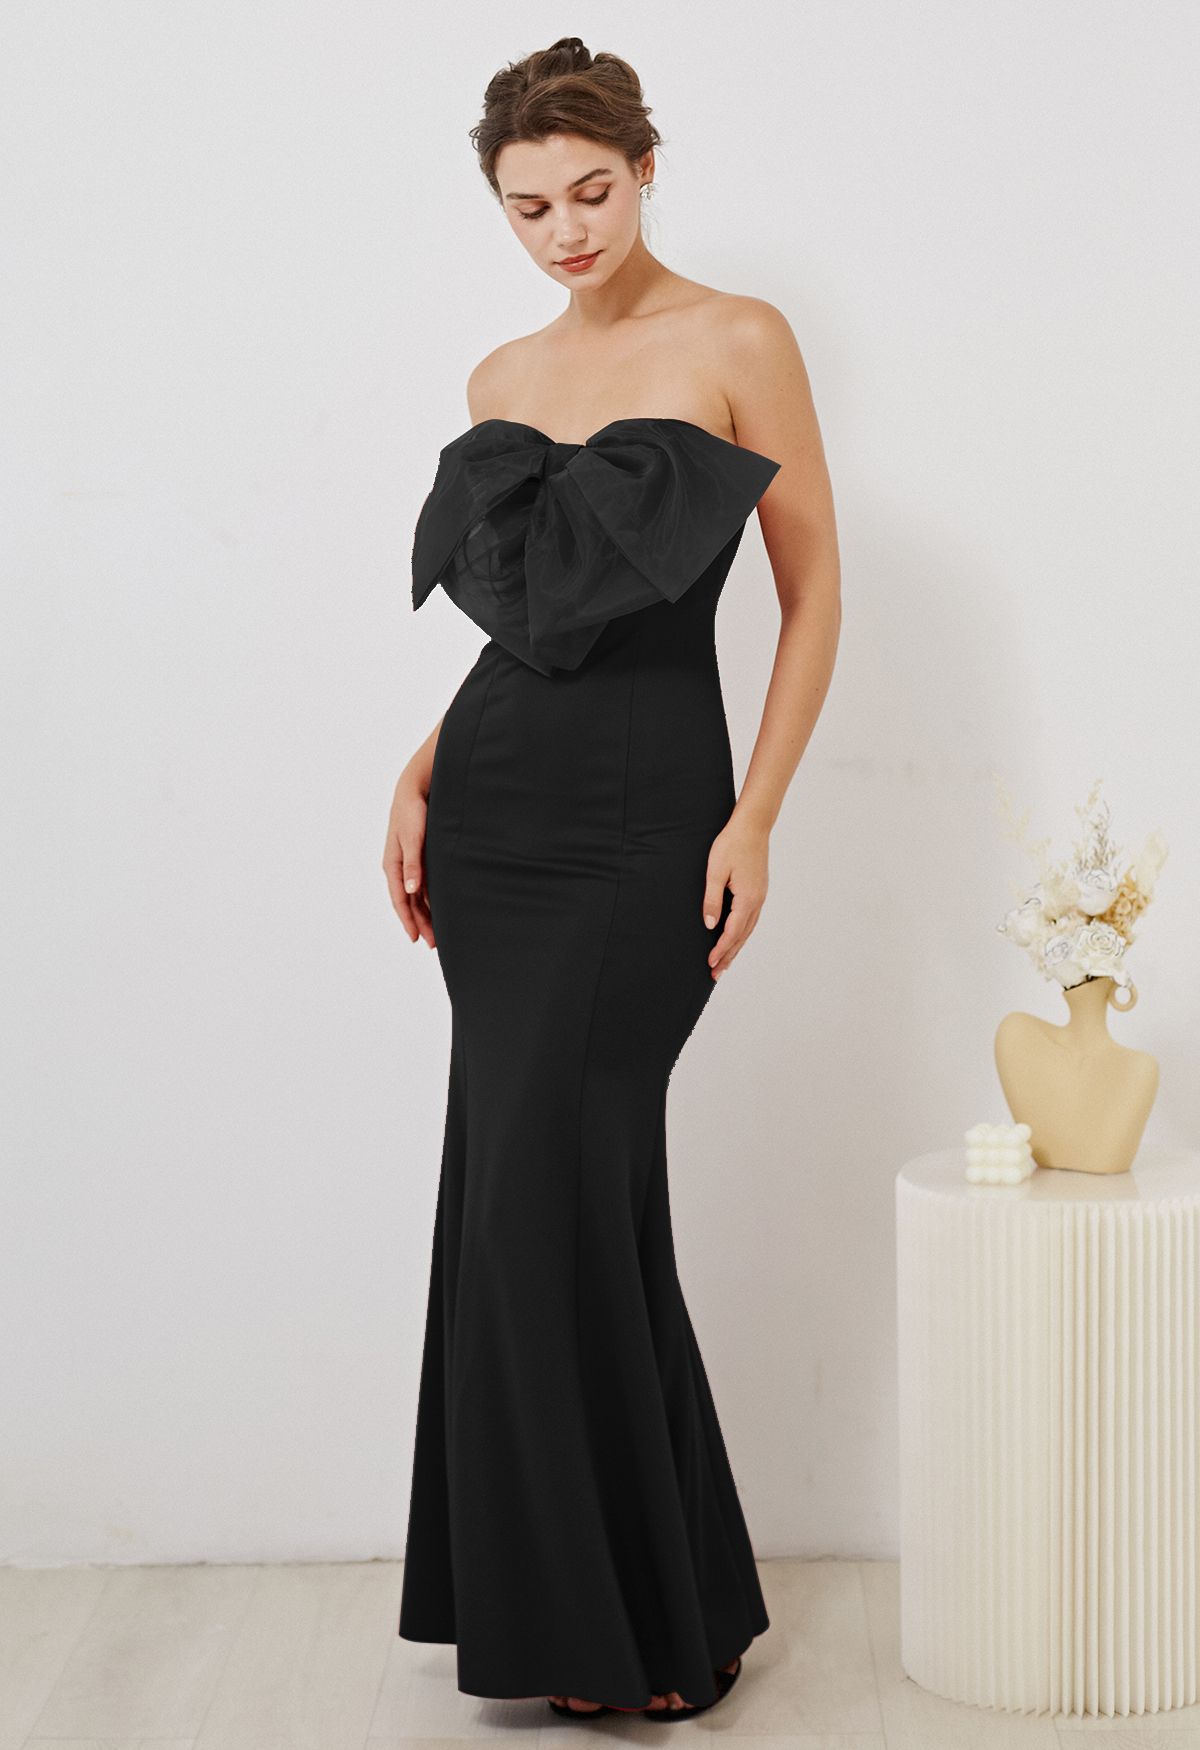 Bowknot Strapless Mermaid Gown in Black